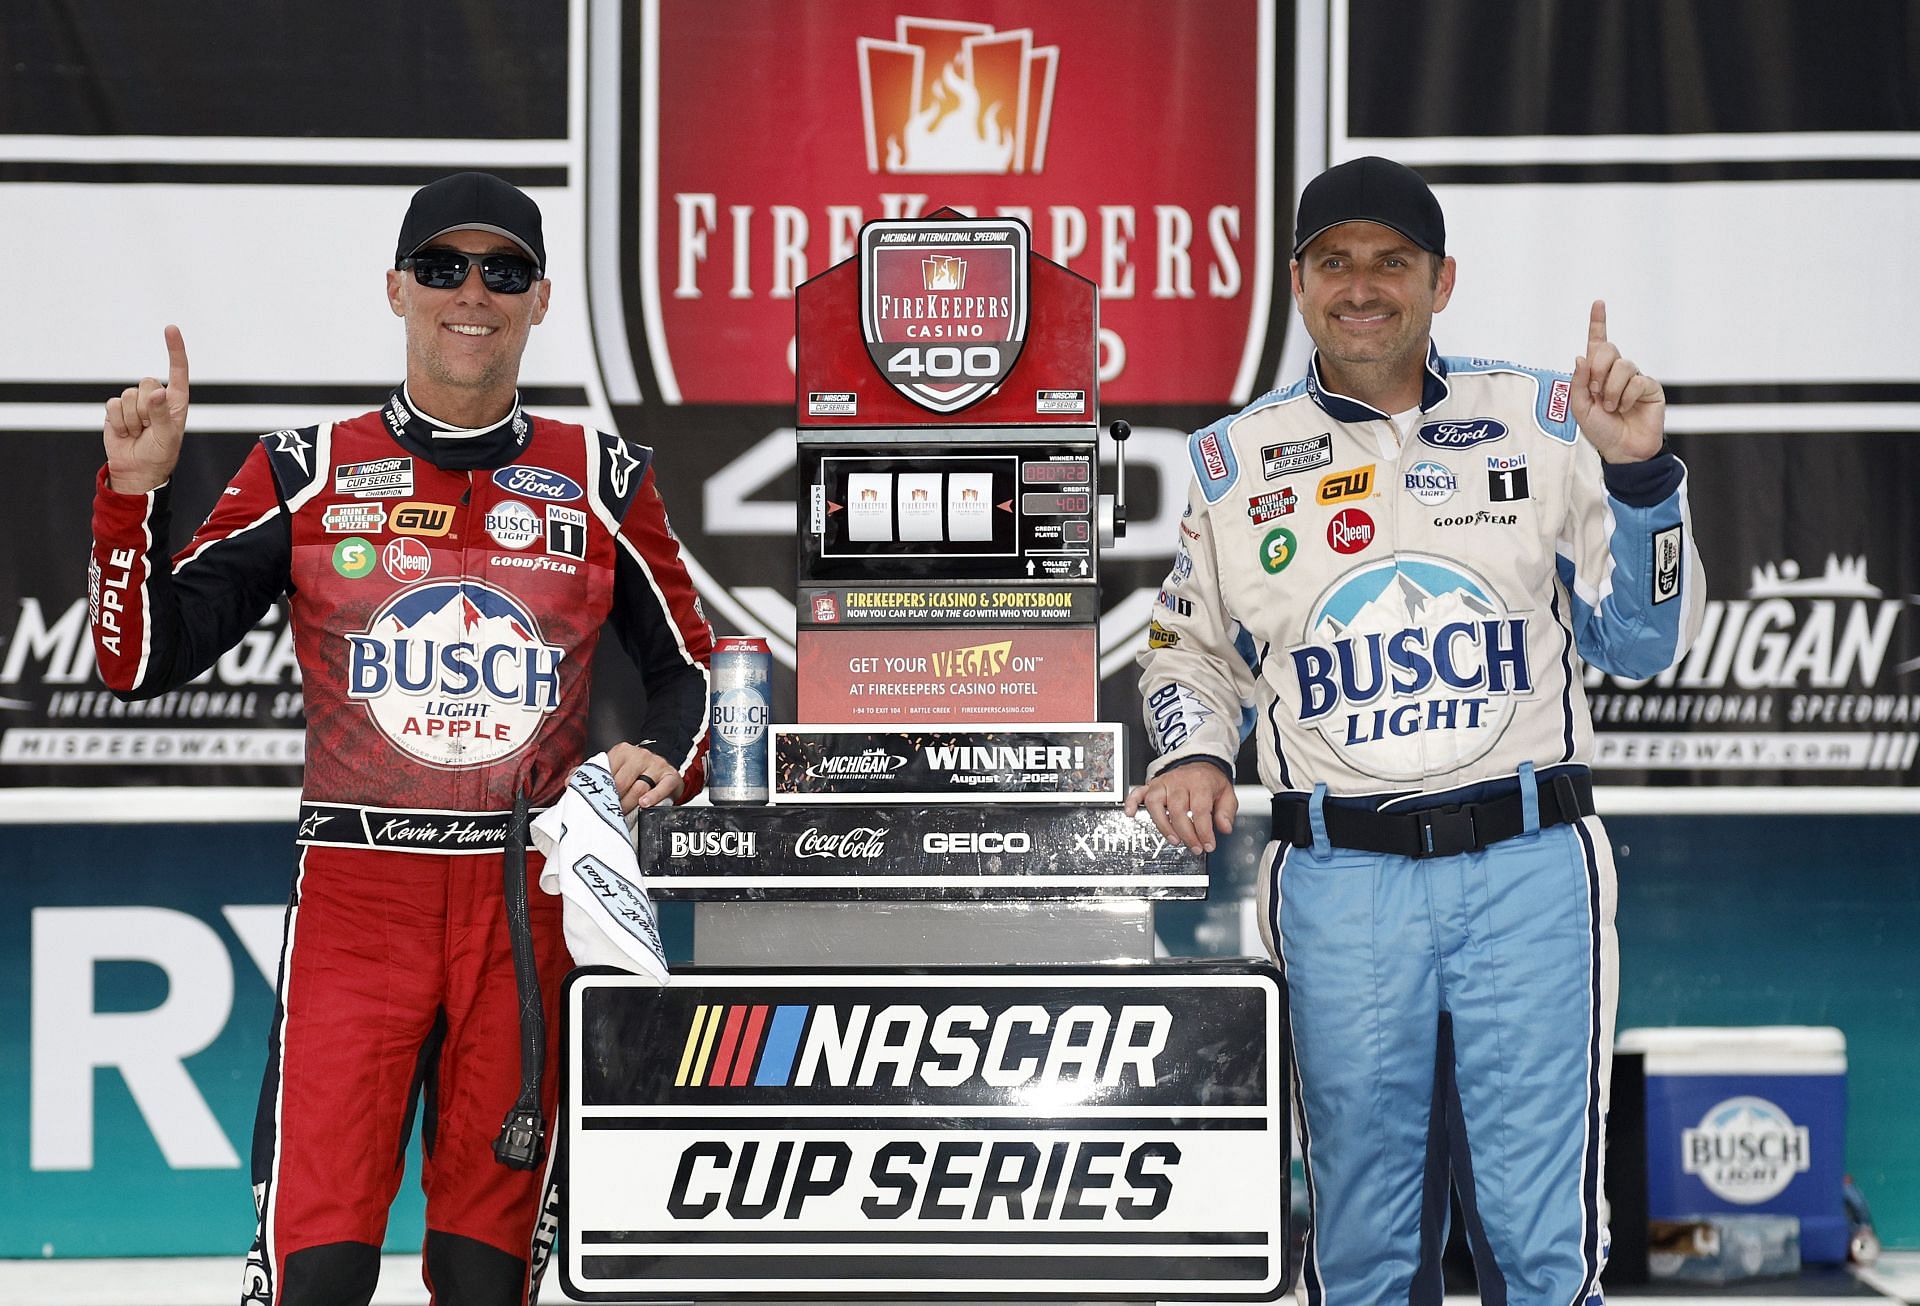 Kevin Harvick (left) and crew chief Rodney Childers celebrate in victory lane after winning the NASCAR Cup Series FireKeepers Casino 400 at Michigan International Speedway